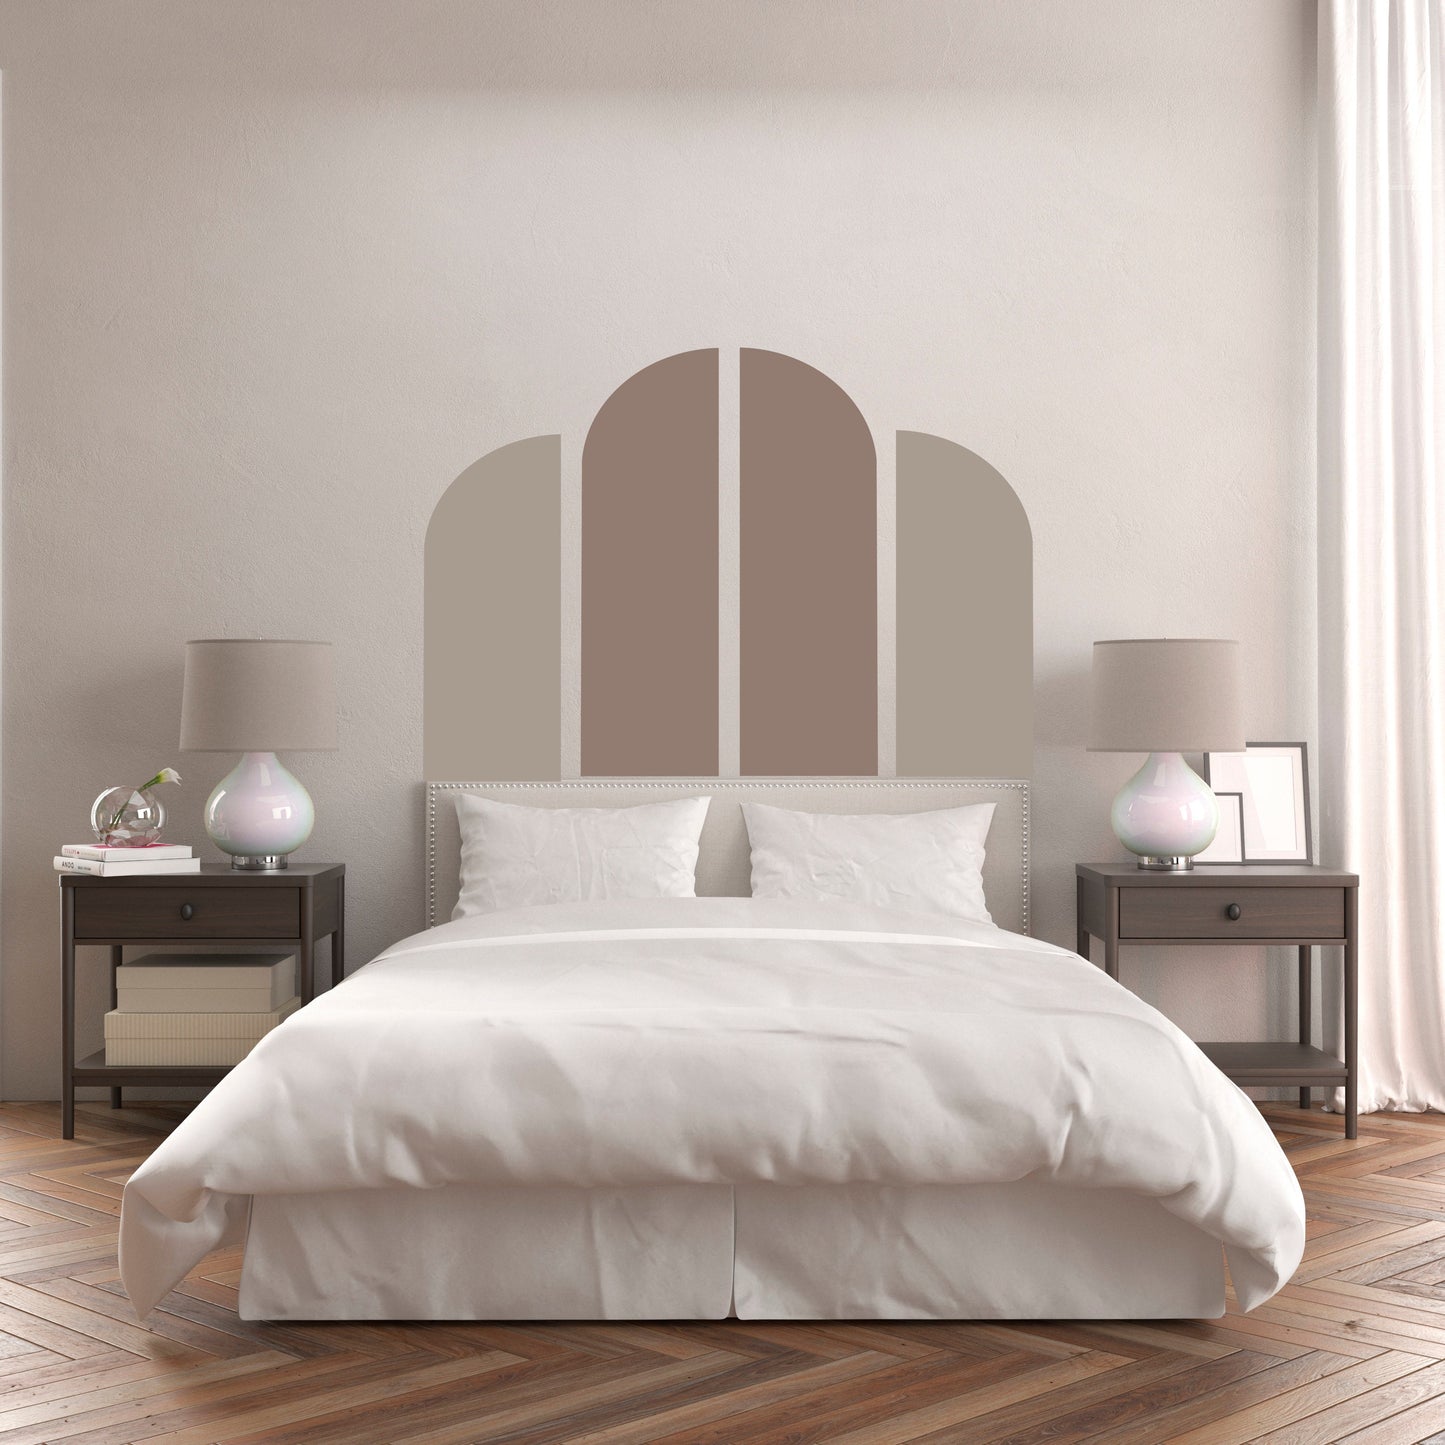 Arch Wall Decal Colour Block Stickers   KL0004